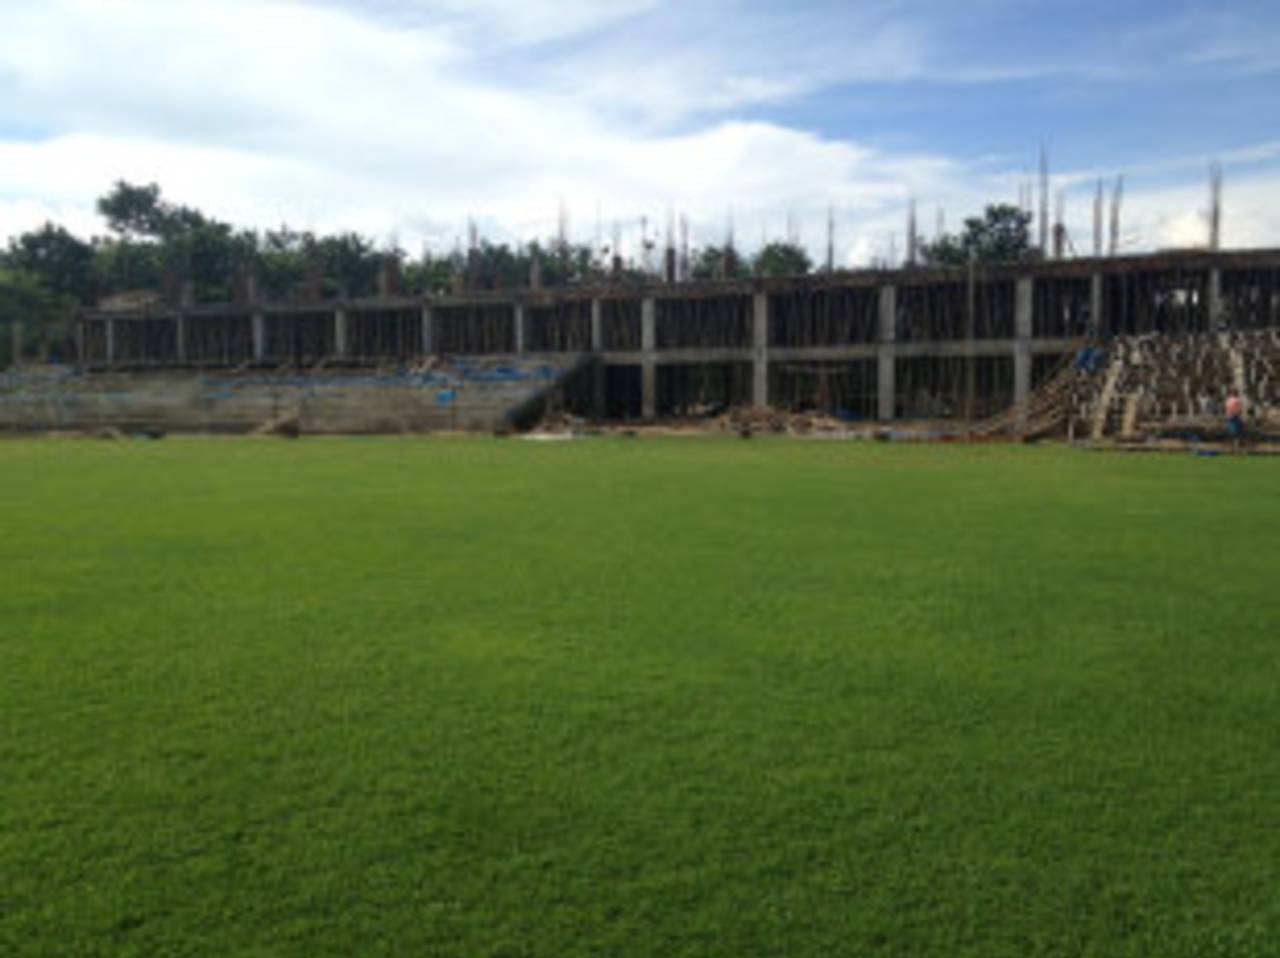 The Sylhet stadium's grandstand was at this stage of construction in August 2013&nbsp;&nbsp;&bull;&nbsp;&nbsp;ESPNcricinfo Ltd